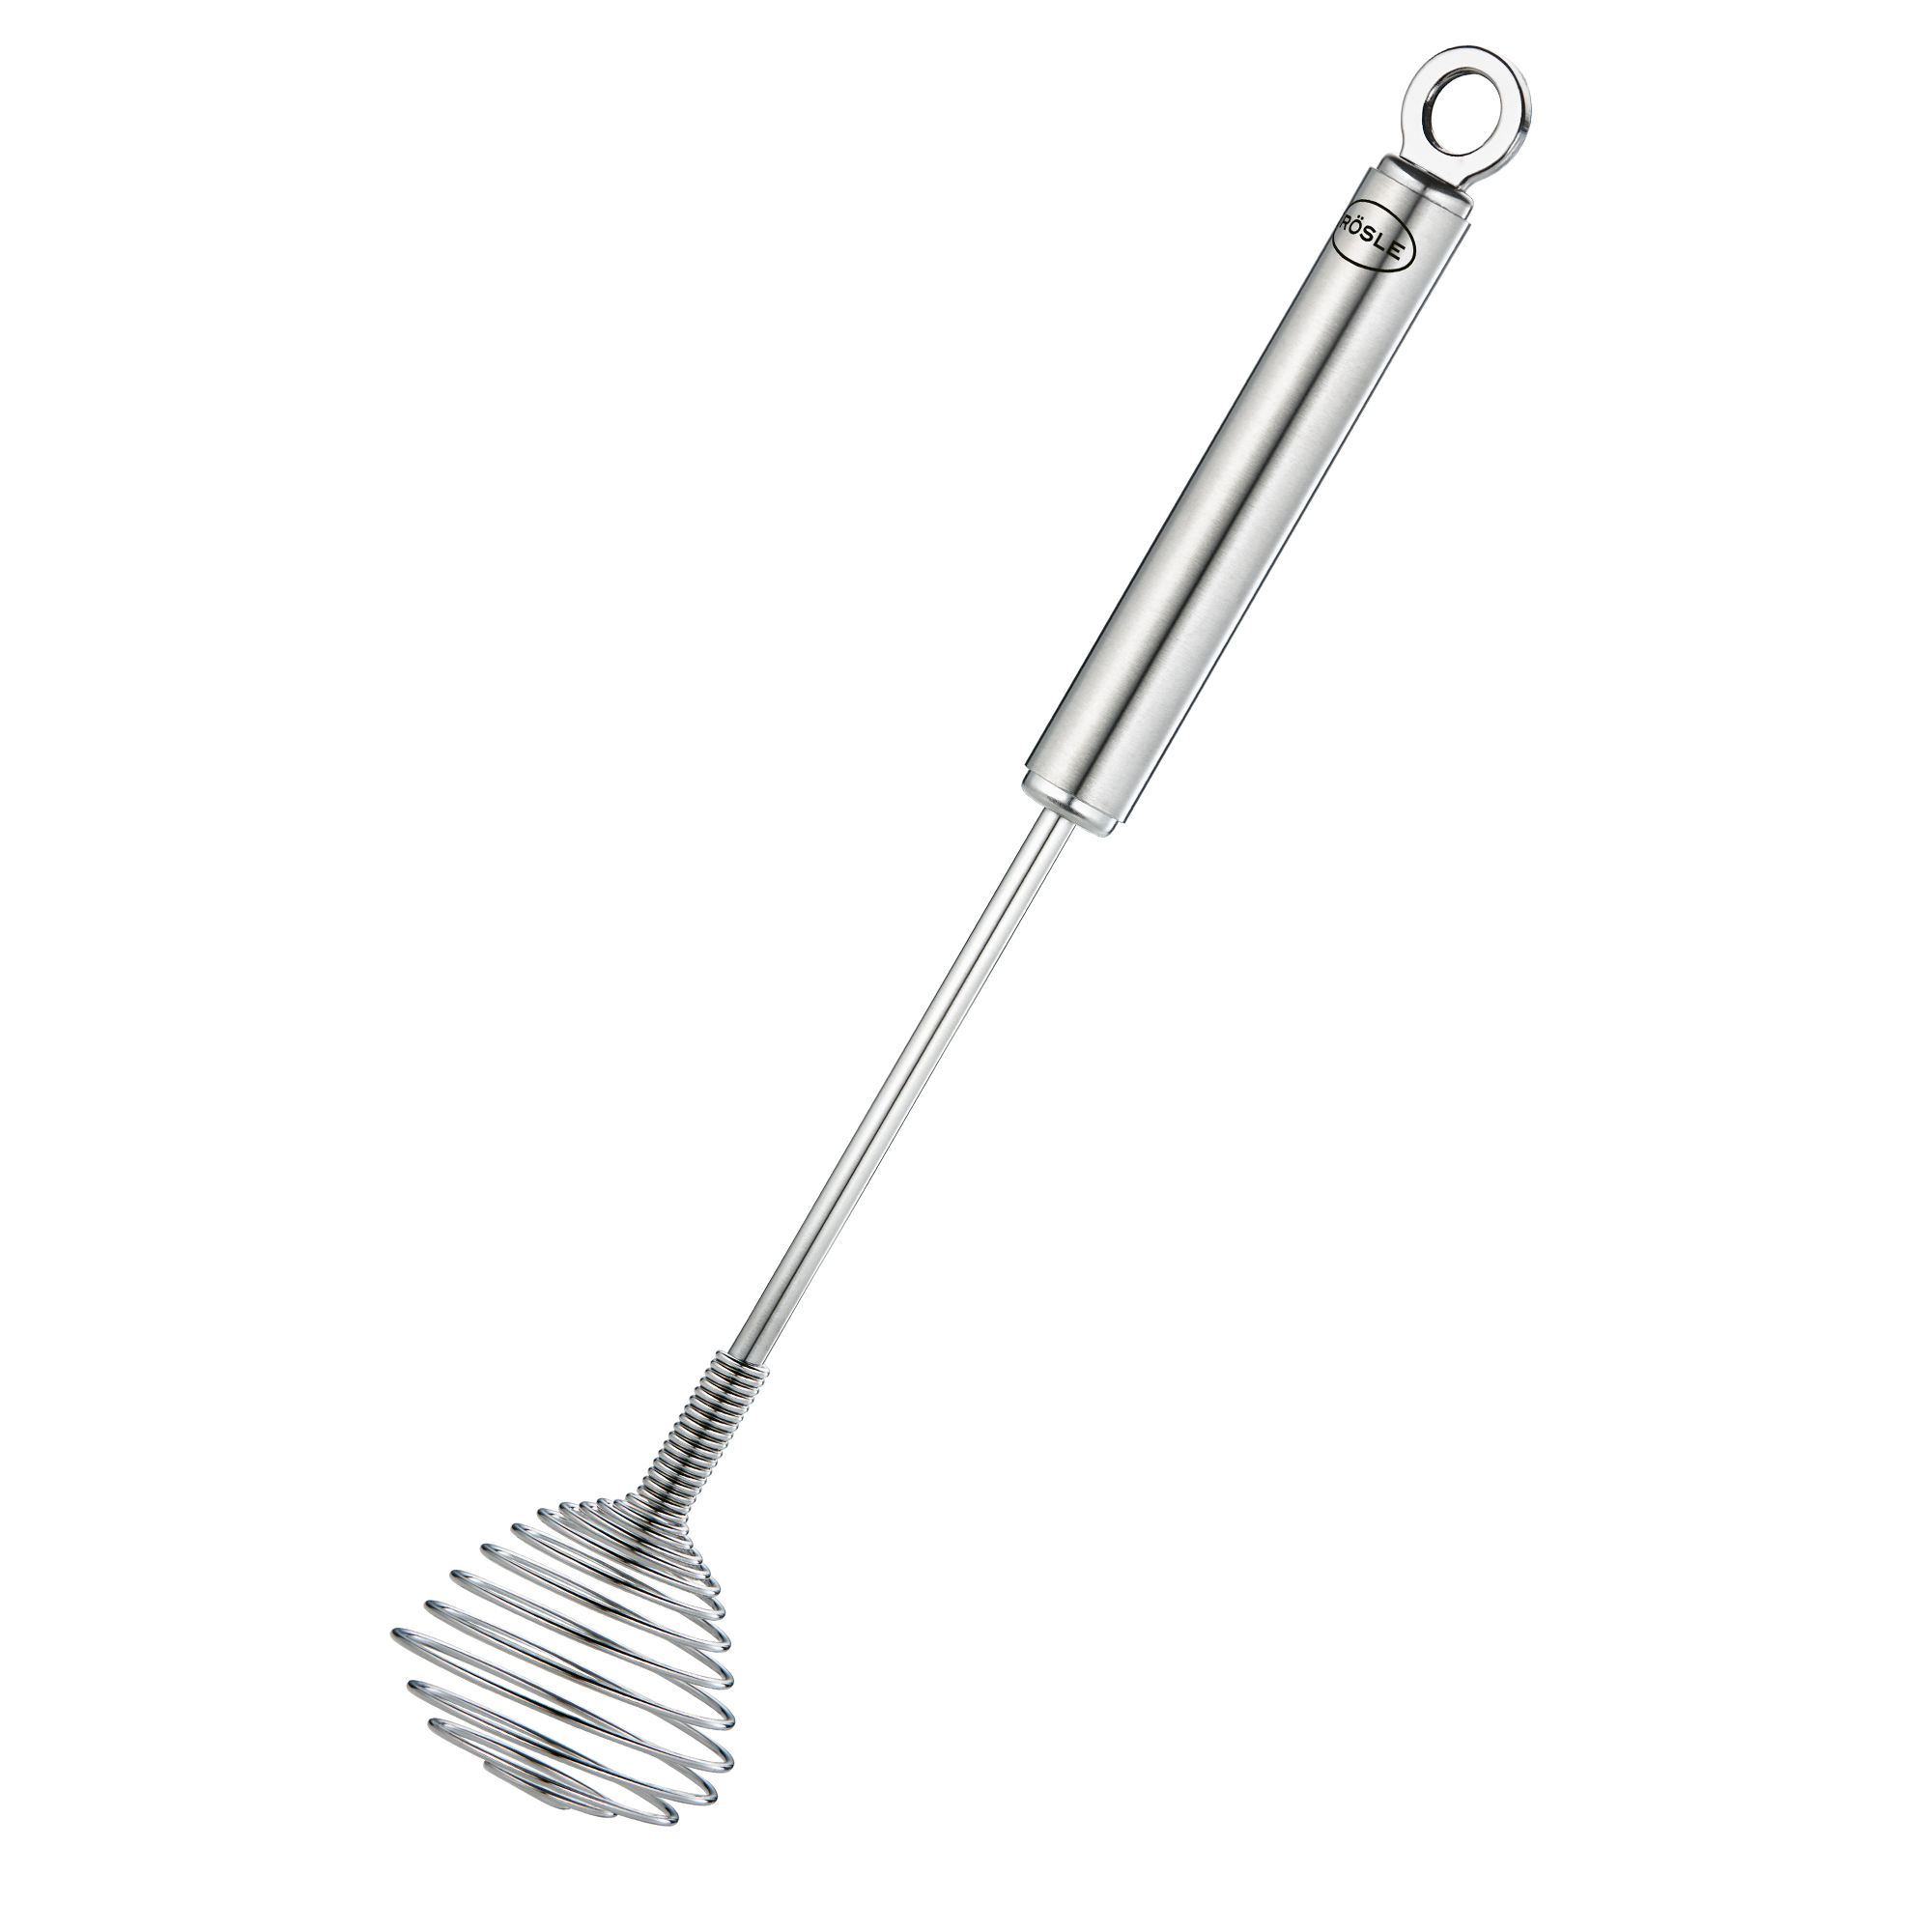 Rösle 95541 ROSLE Spiral Whisk, Size 5-22 Centimeters, Stainless